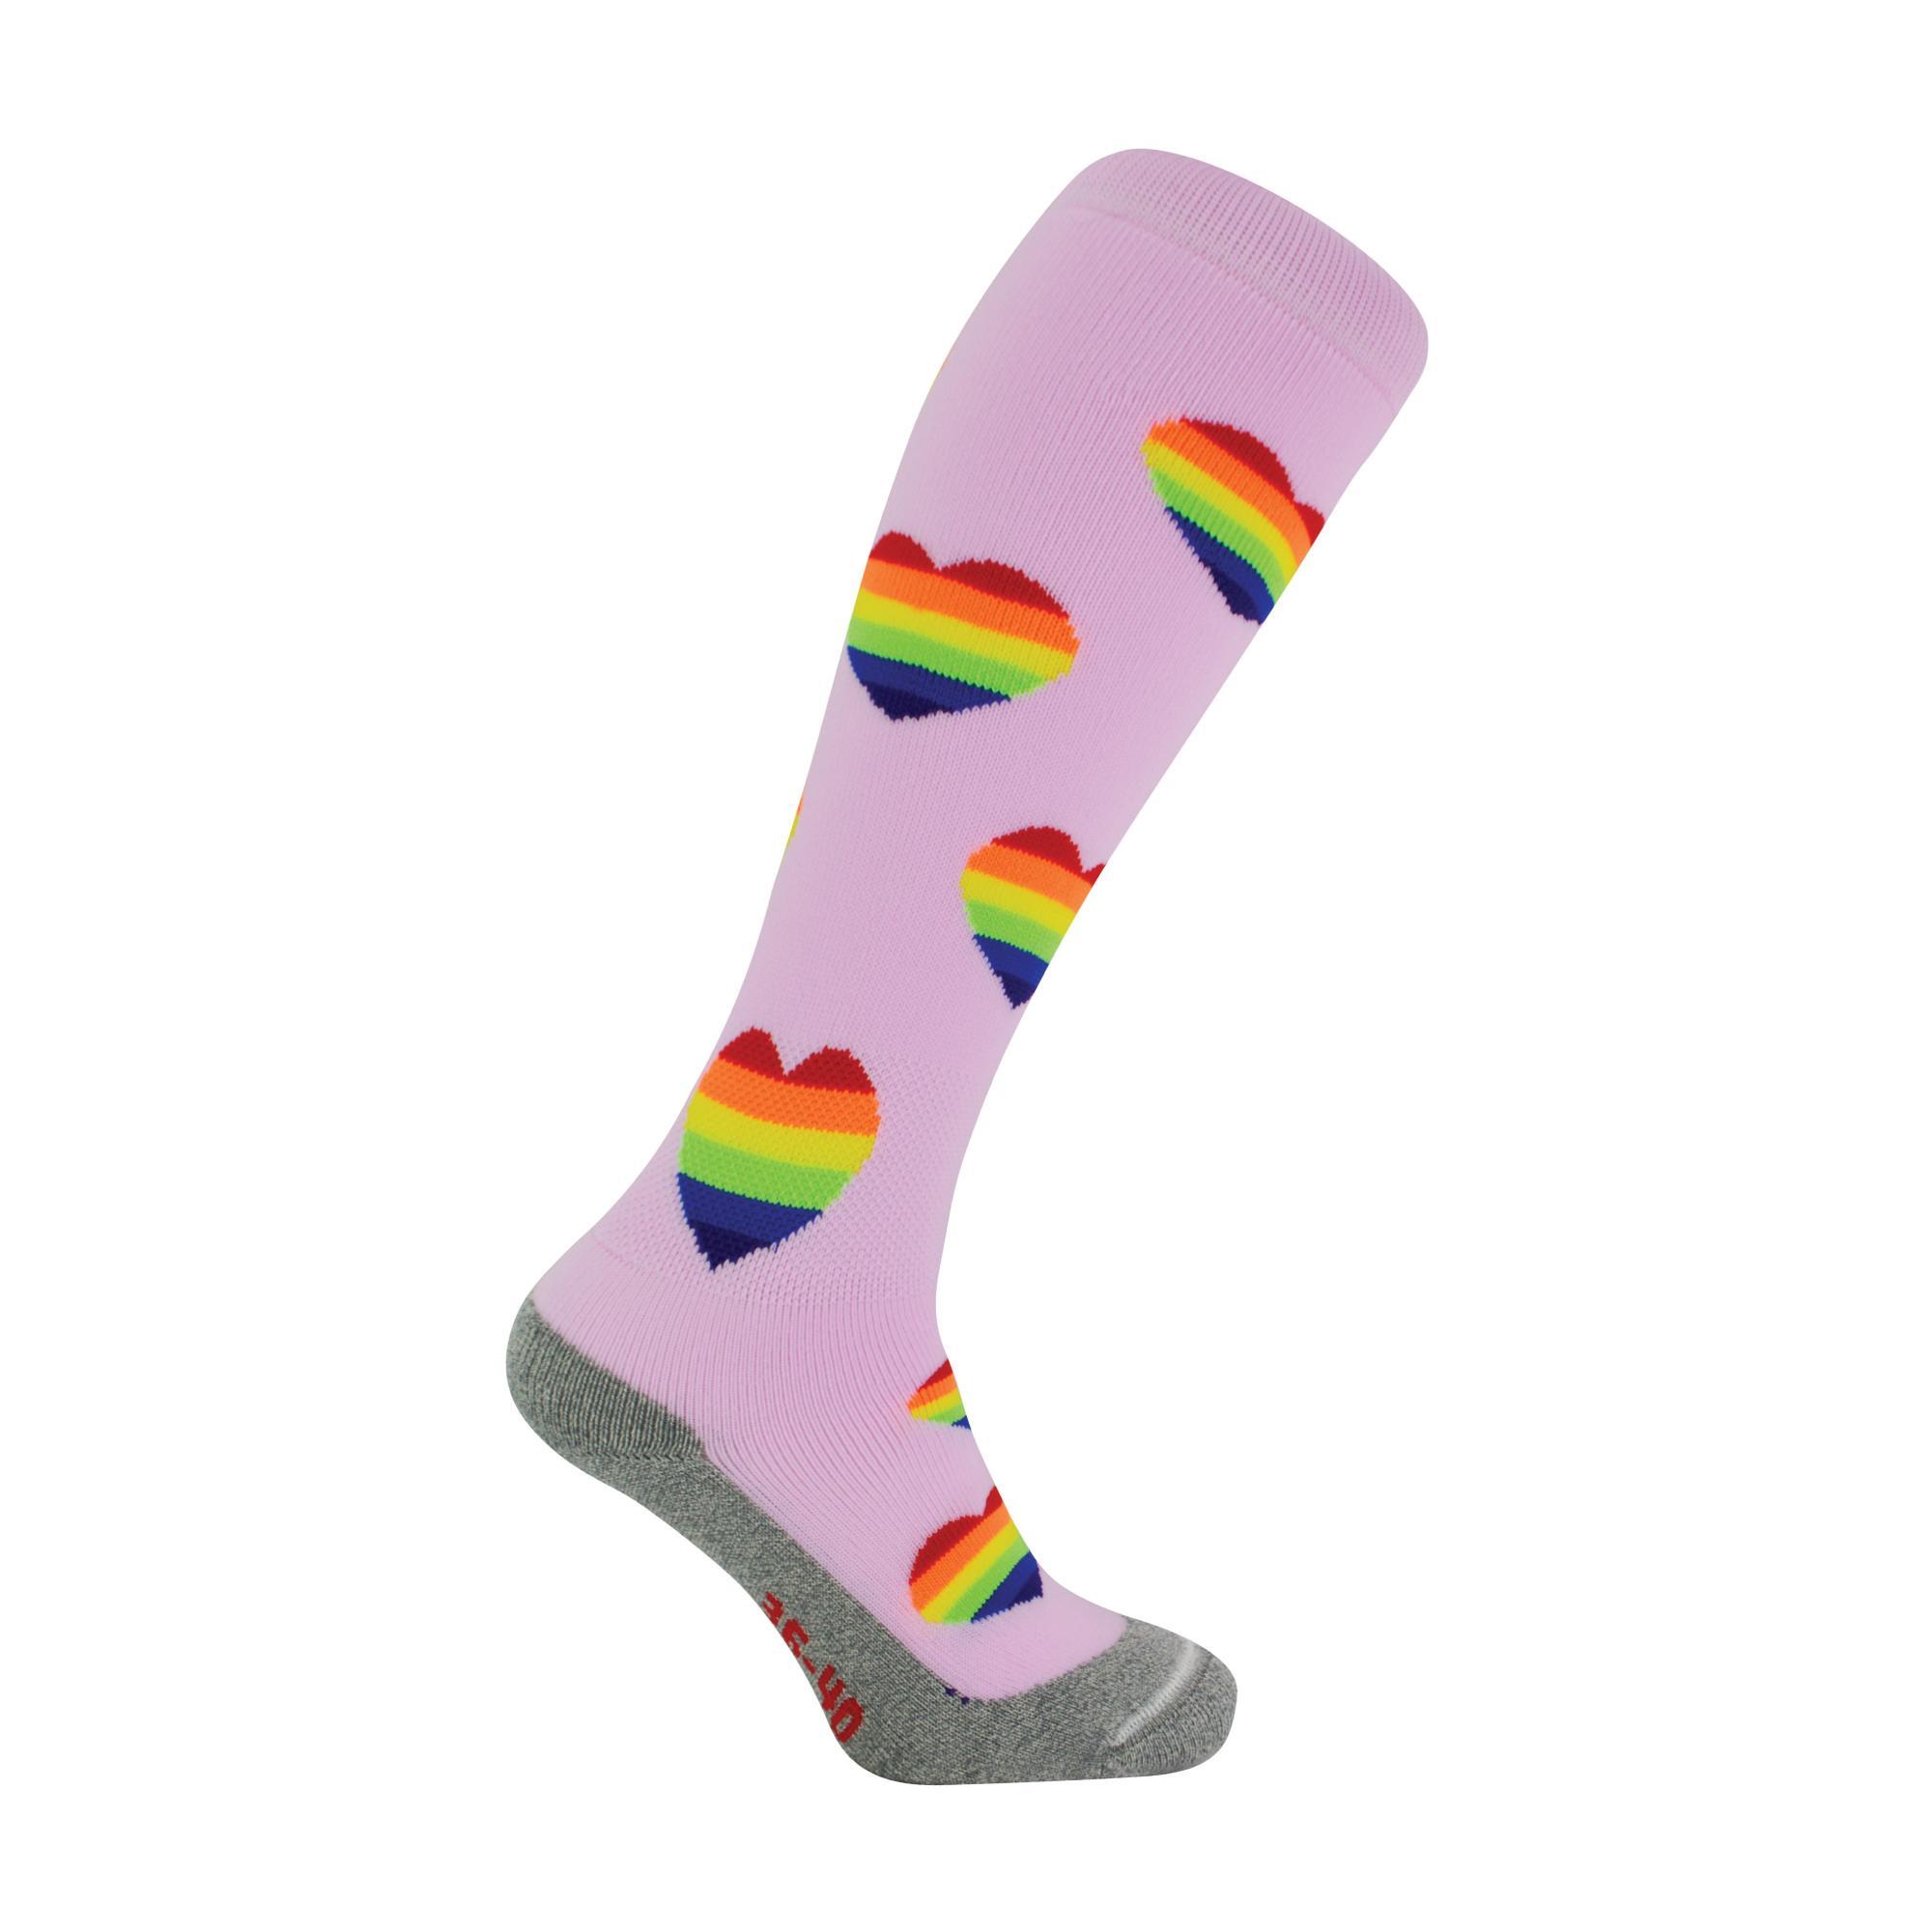 HINGLY Knee High Hockey Socks with Funky Fun Patterns | Adult Sizes